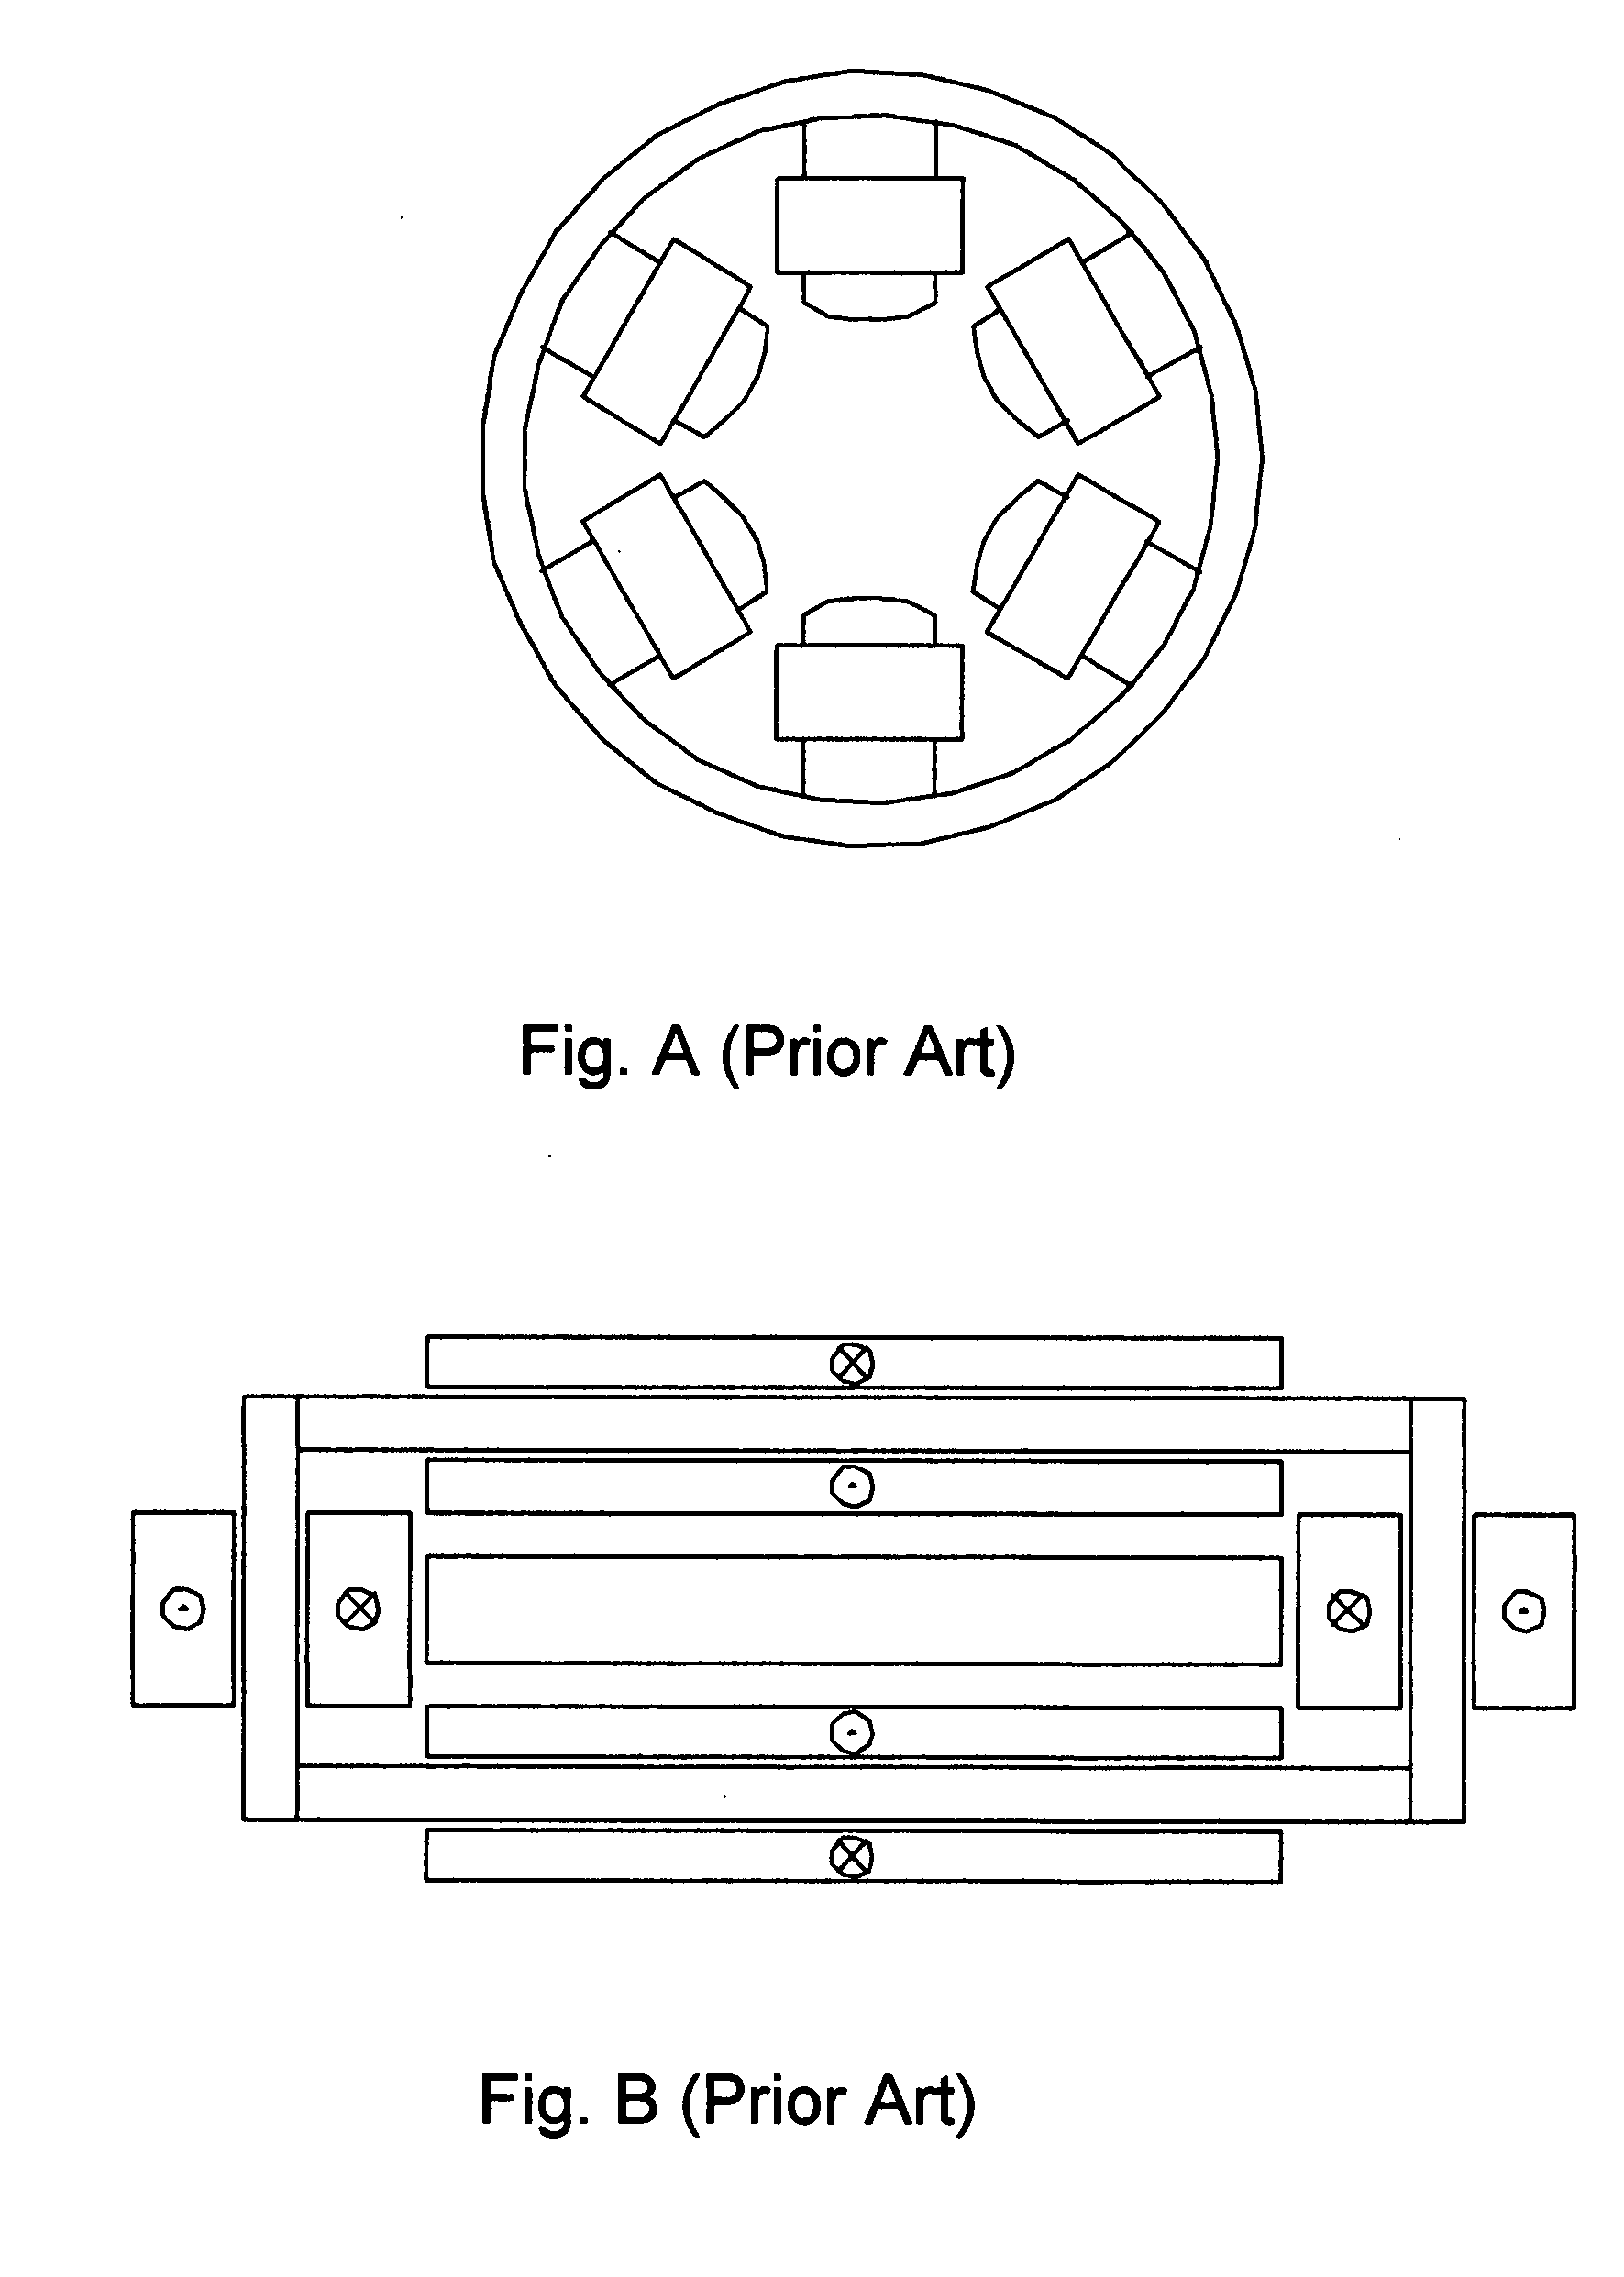 Electromagnetic regulator assembly for adjusting and controlling the current uniformity of continuous ion beams